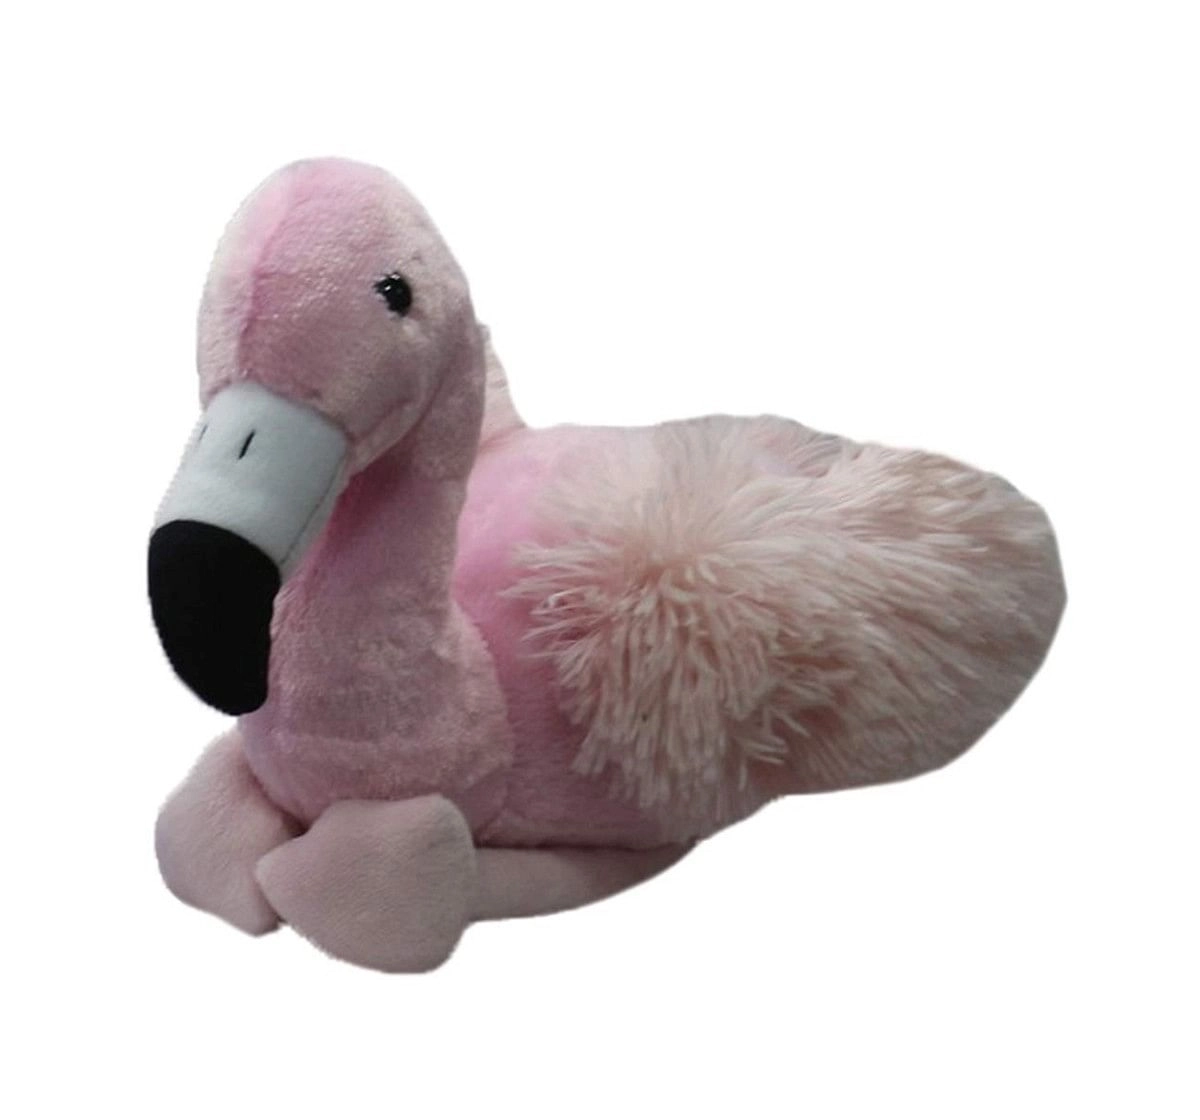  My Baby Excel Flamingo 32 Cm Quirky Soft Toy for Kids age 12M+ - 10 Cm (Pink)